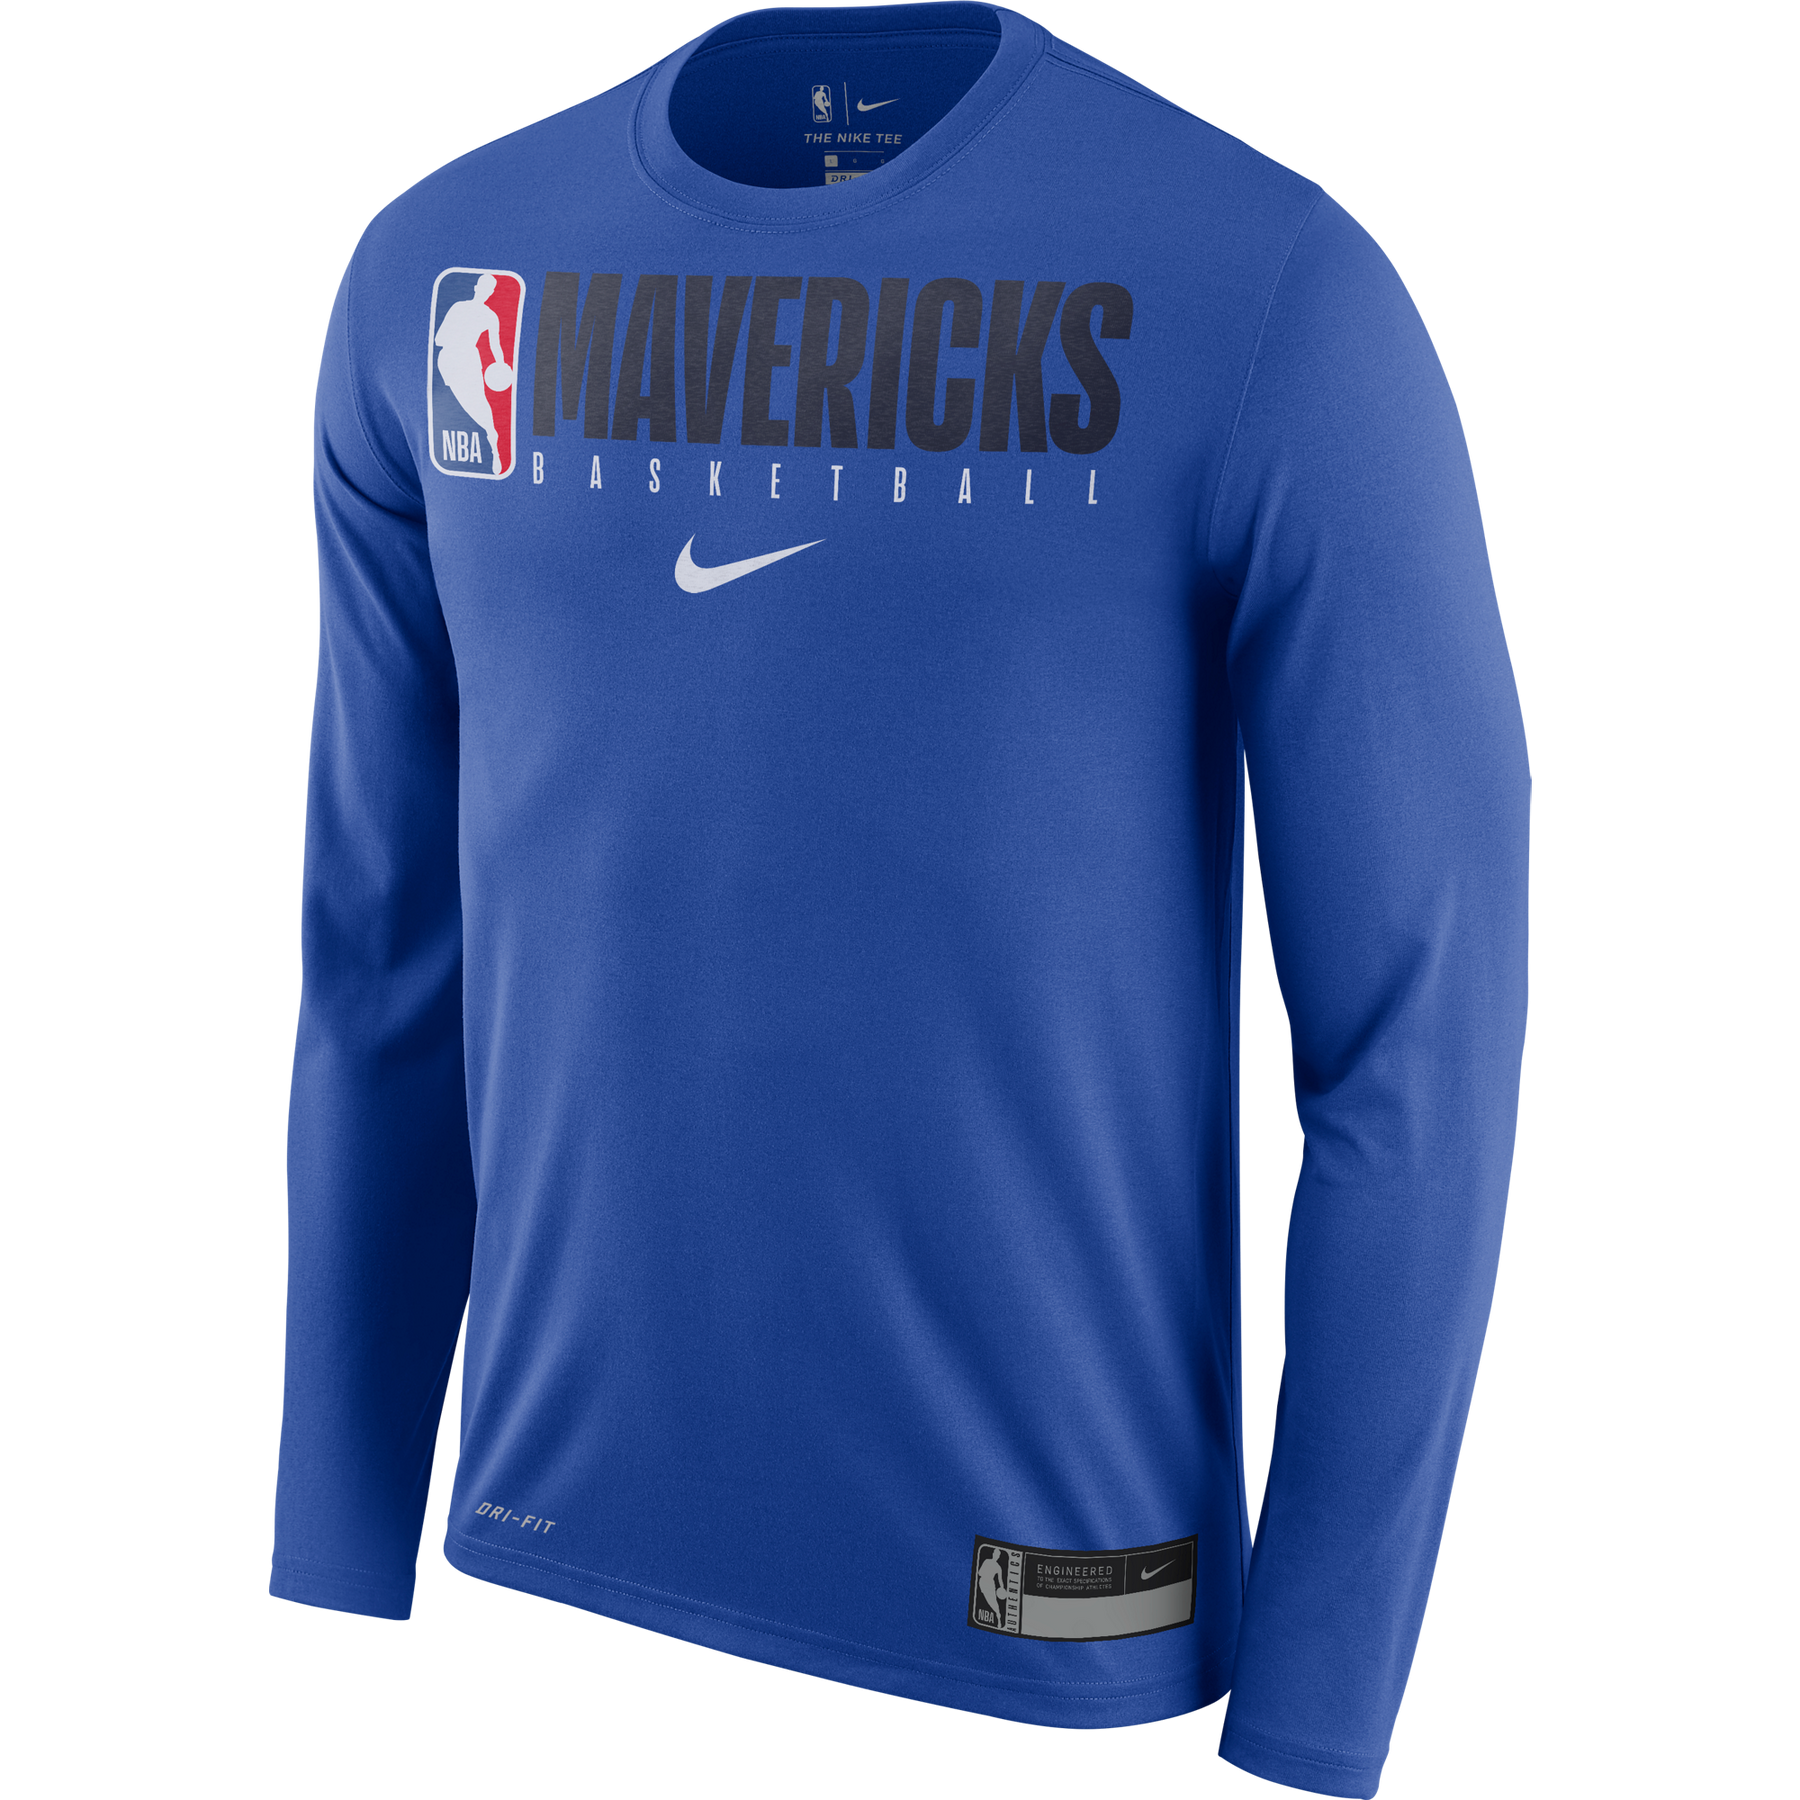 NBA Uniforms Will No Longer Have Sleeves Under Nike